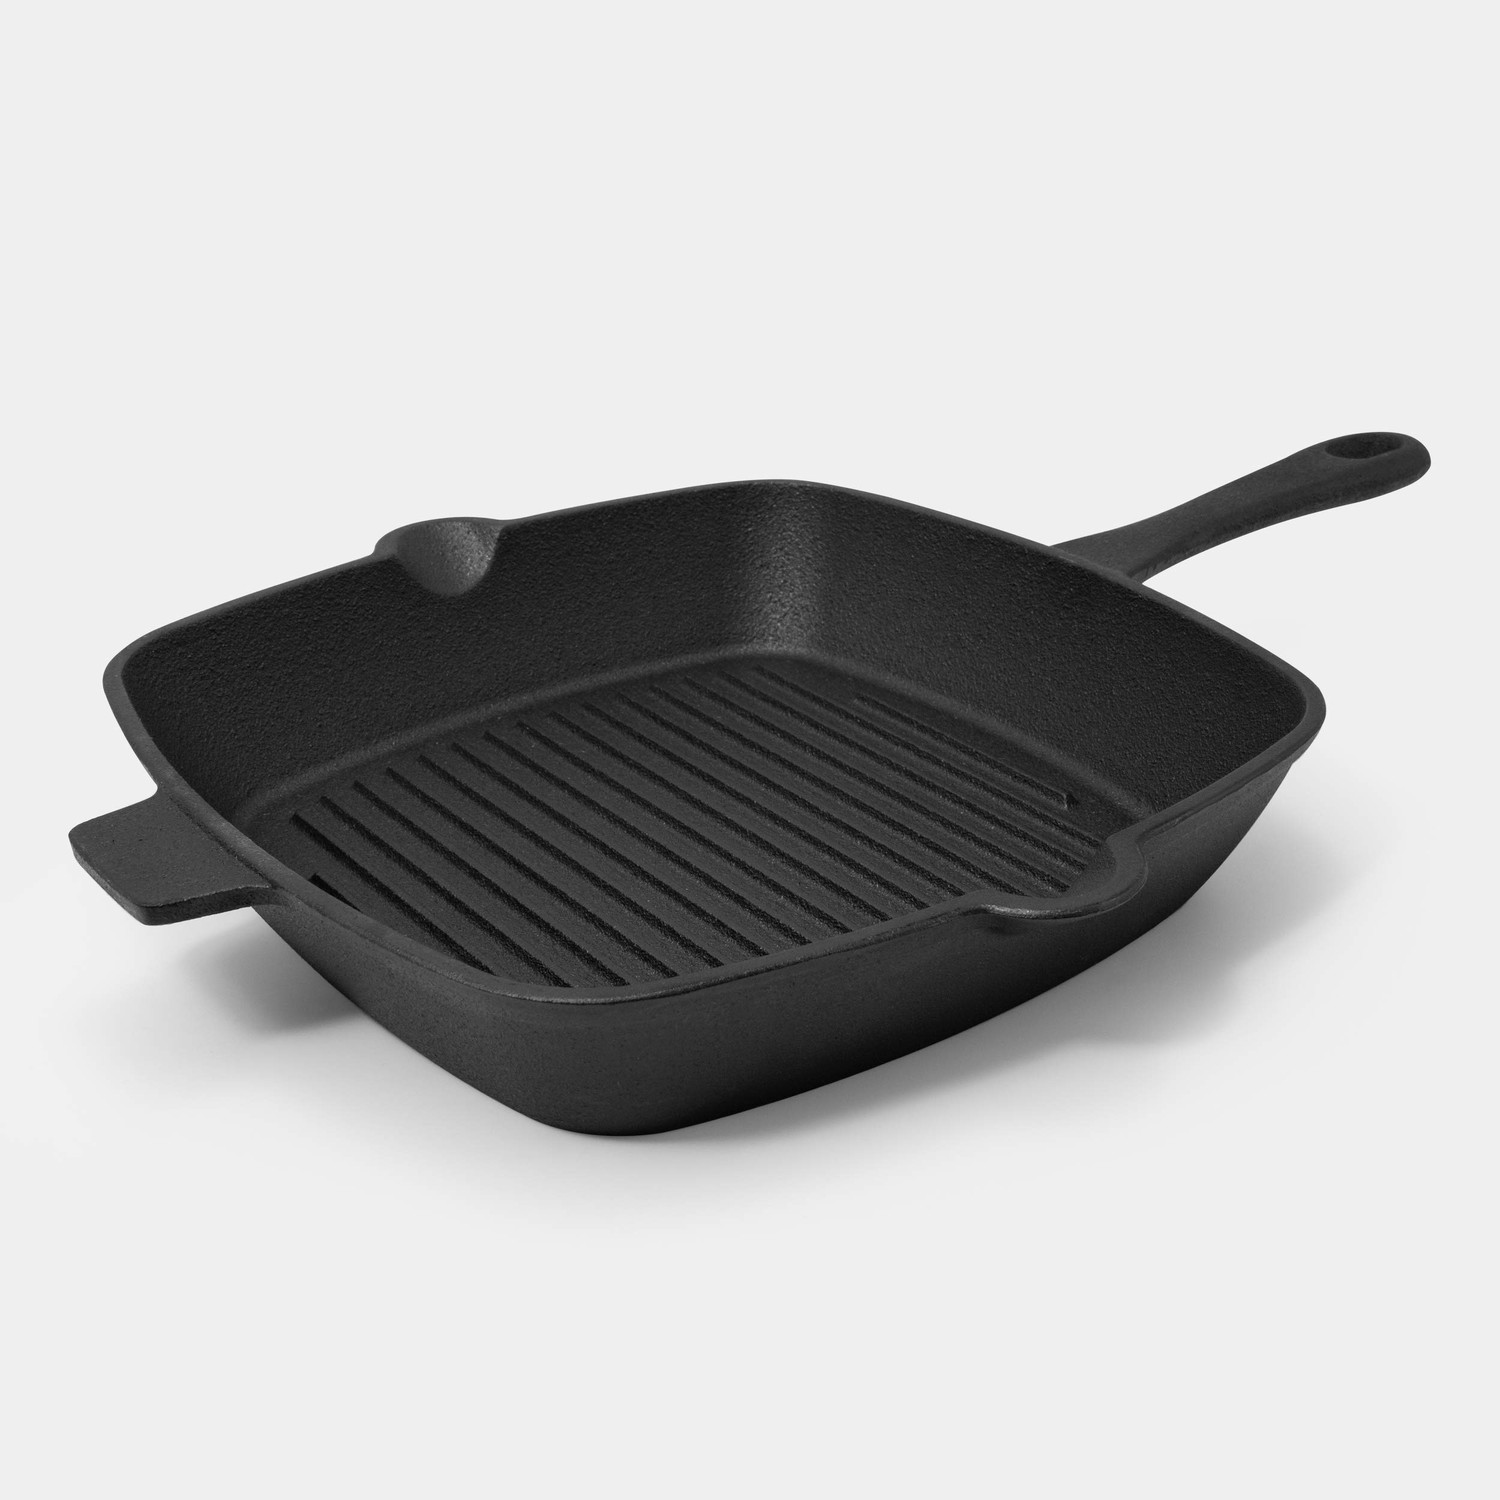 Excelsteel 440 10 Inch Square Cast Iron Grill Pan